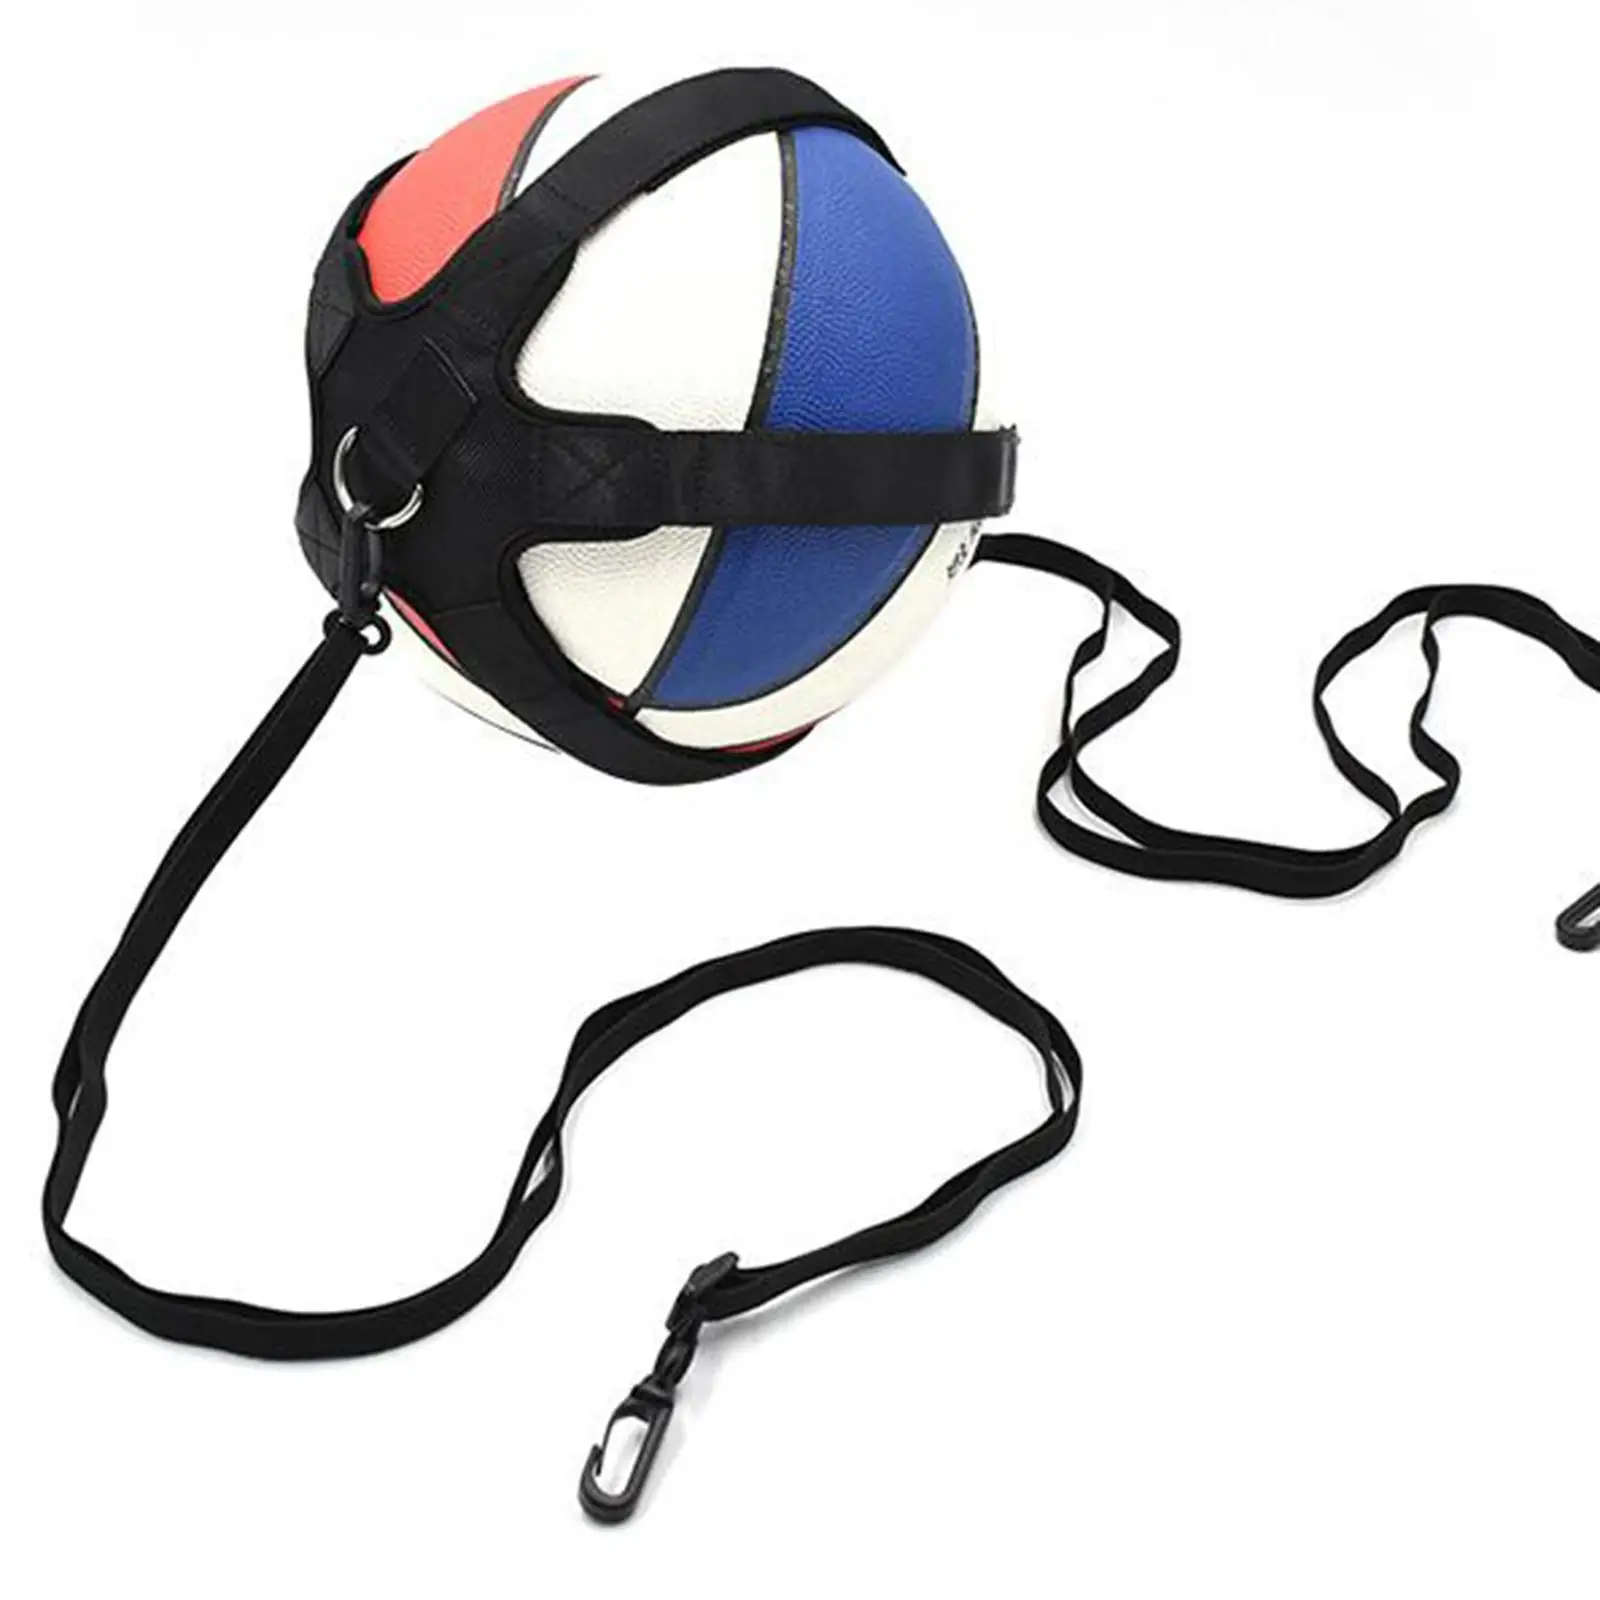 Volleyball Training Equipment Solo Volleyball Trainer for Beginners Setting